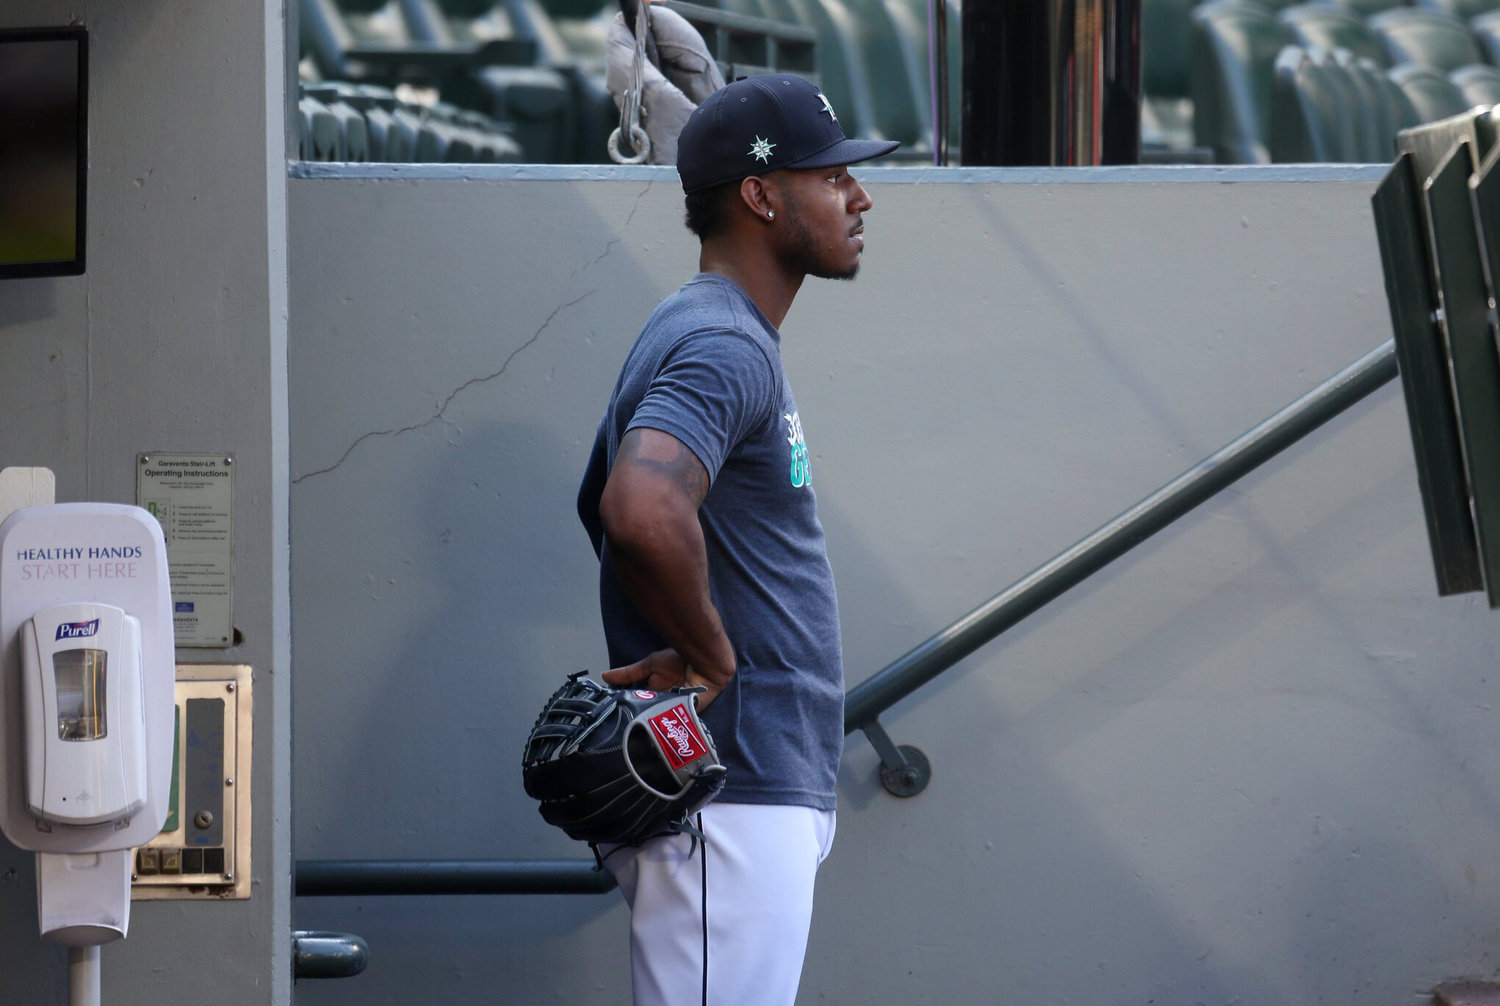 Kyle Lewis watches batting practice from the dugout before a game against the Astros last month.